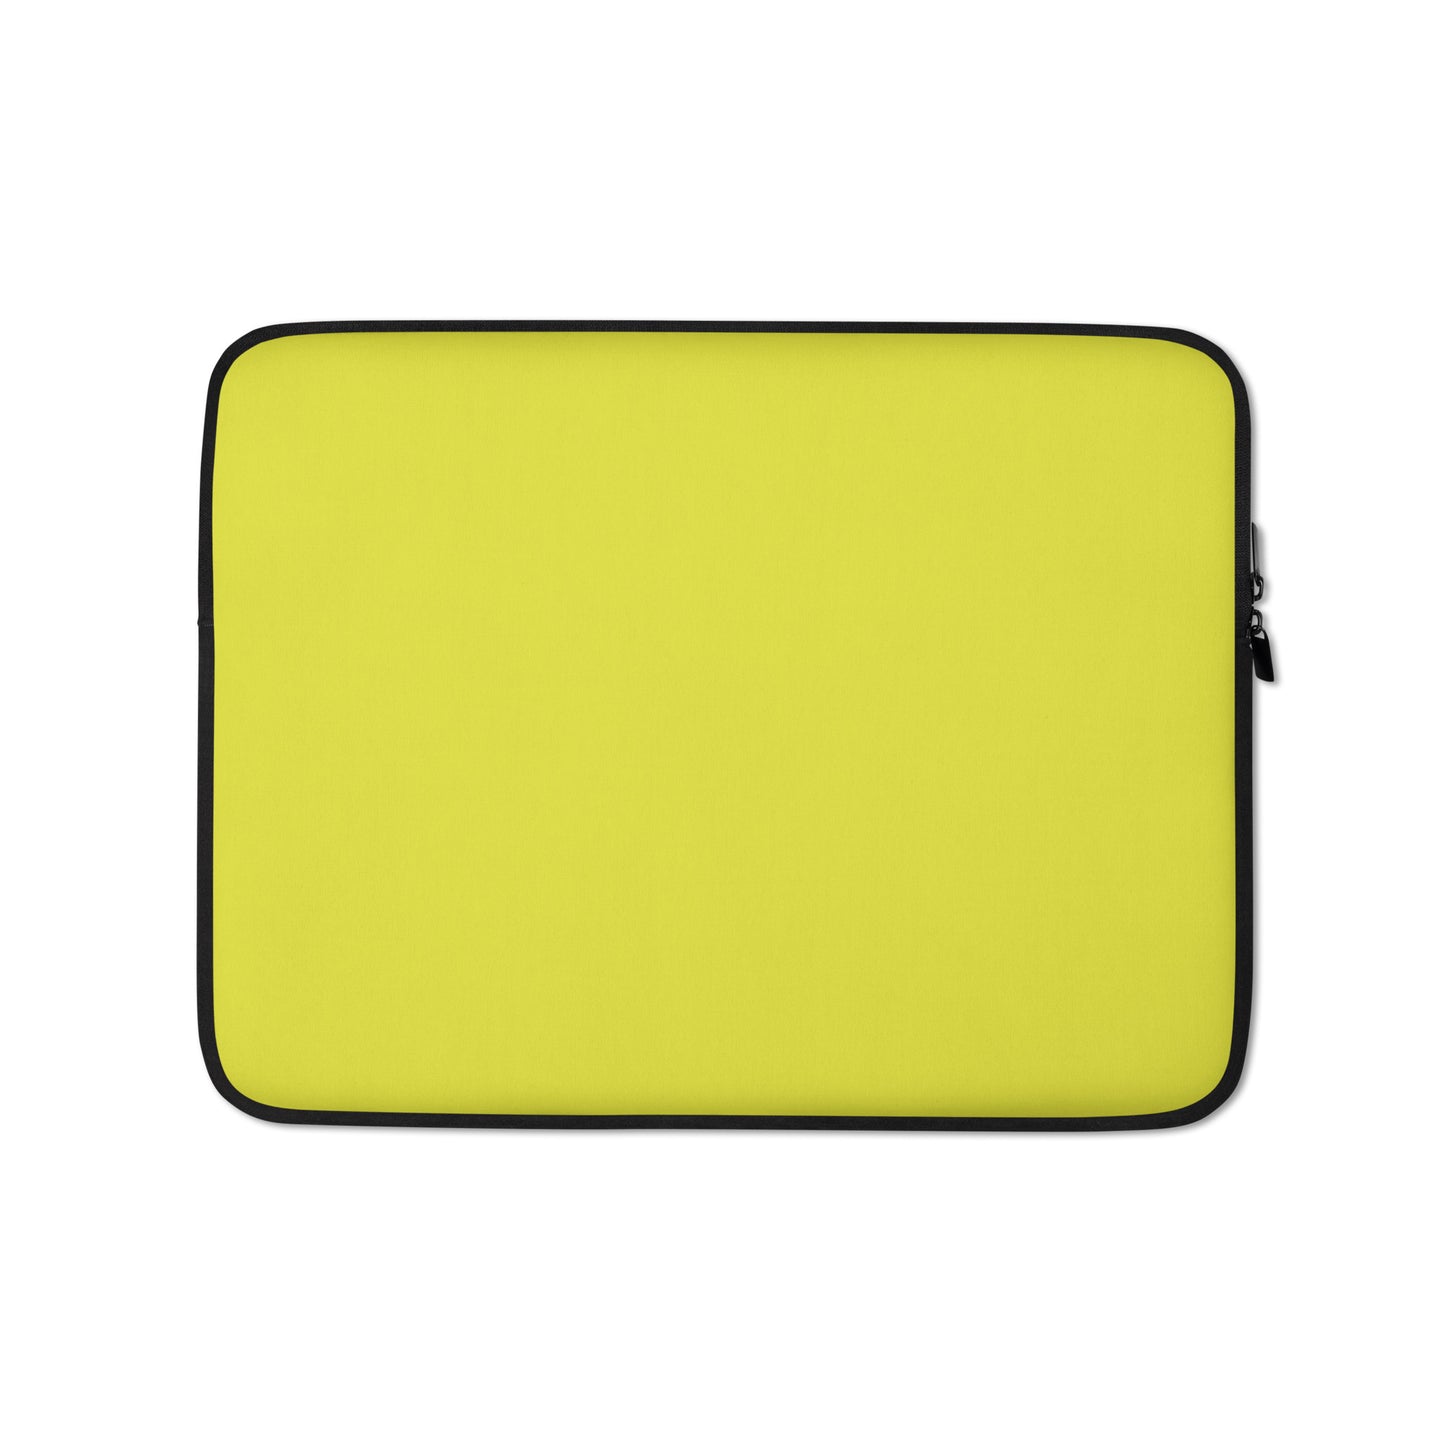 Laptop Sleeve Case - Yellow - Holiday Accent Ltd